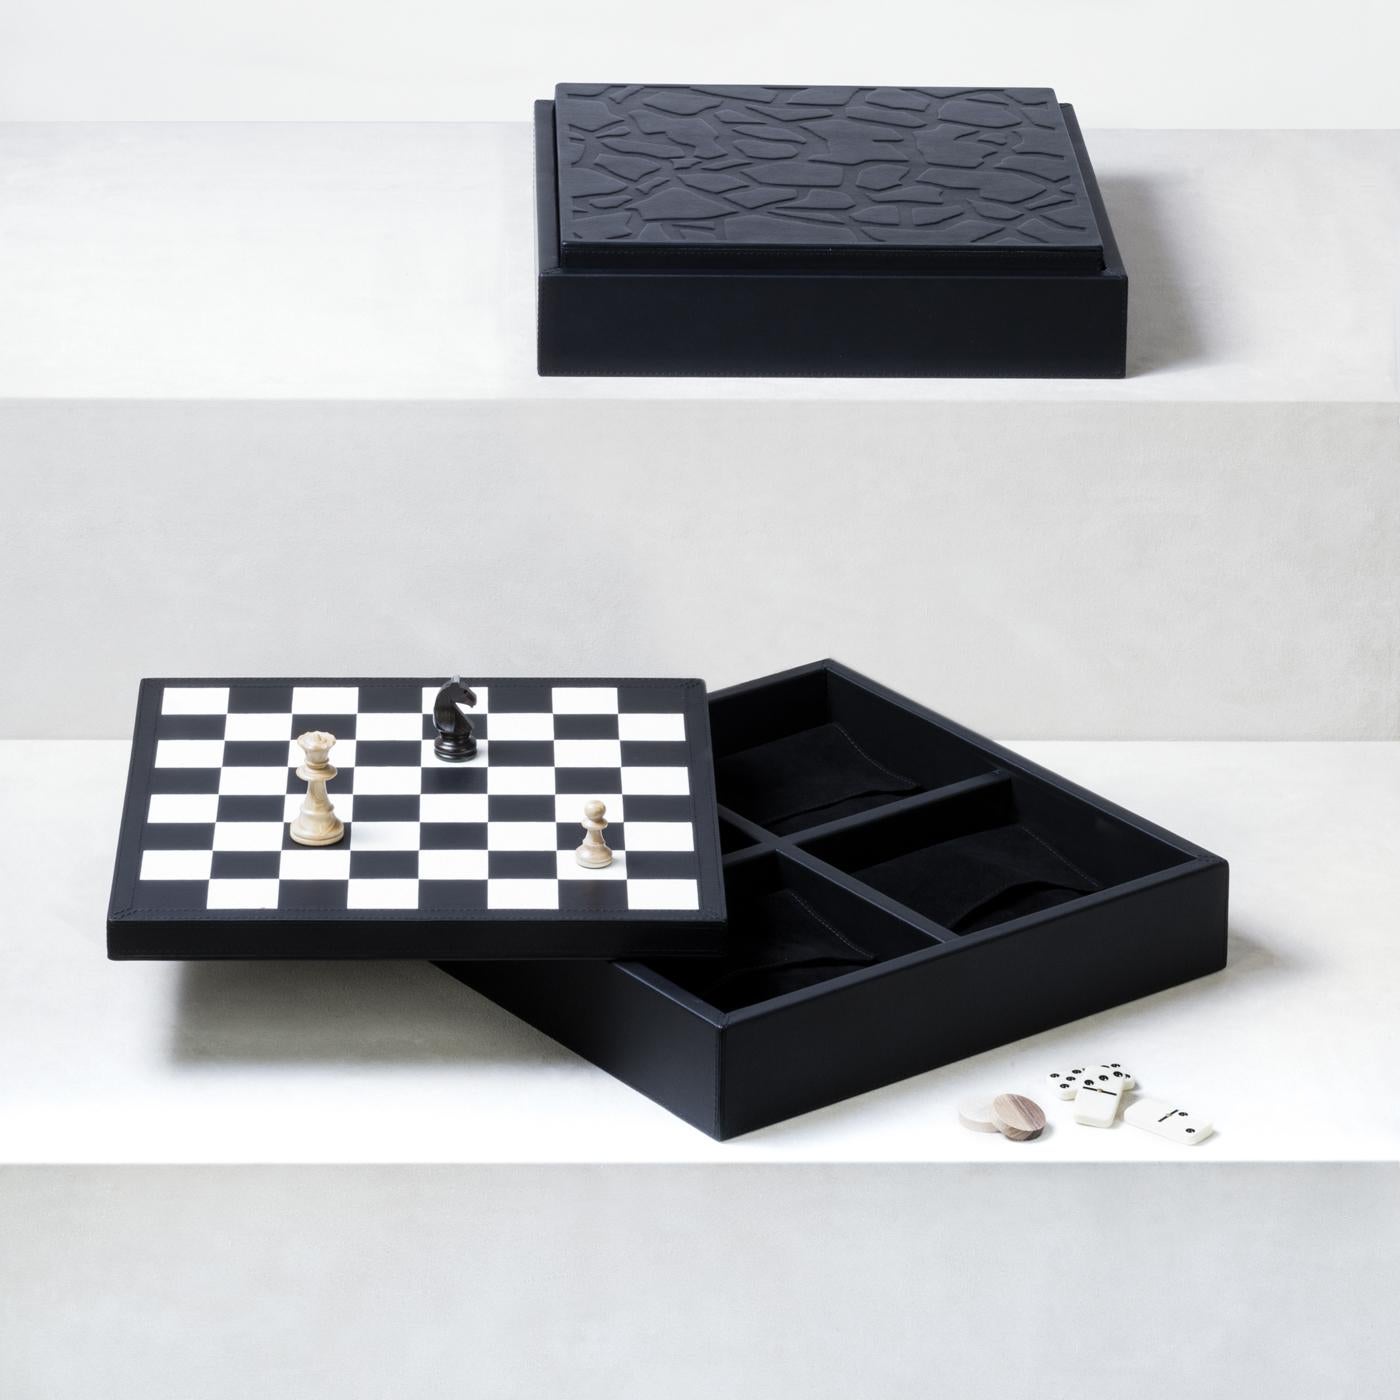 This elegant game box is part of the Tosca collection, a limited edition series that boasts skilful craftsmanship and noble materials. The black nappa leather that upholsters the wooden box is divided in compartments to better store the boxwood